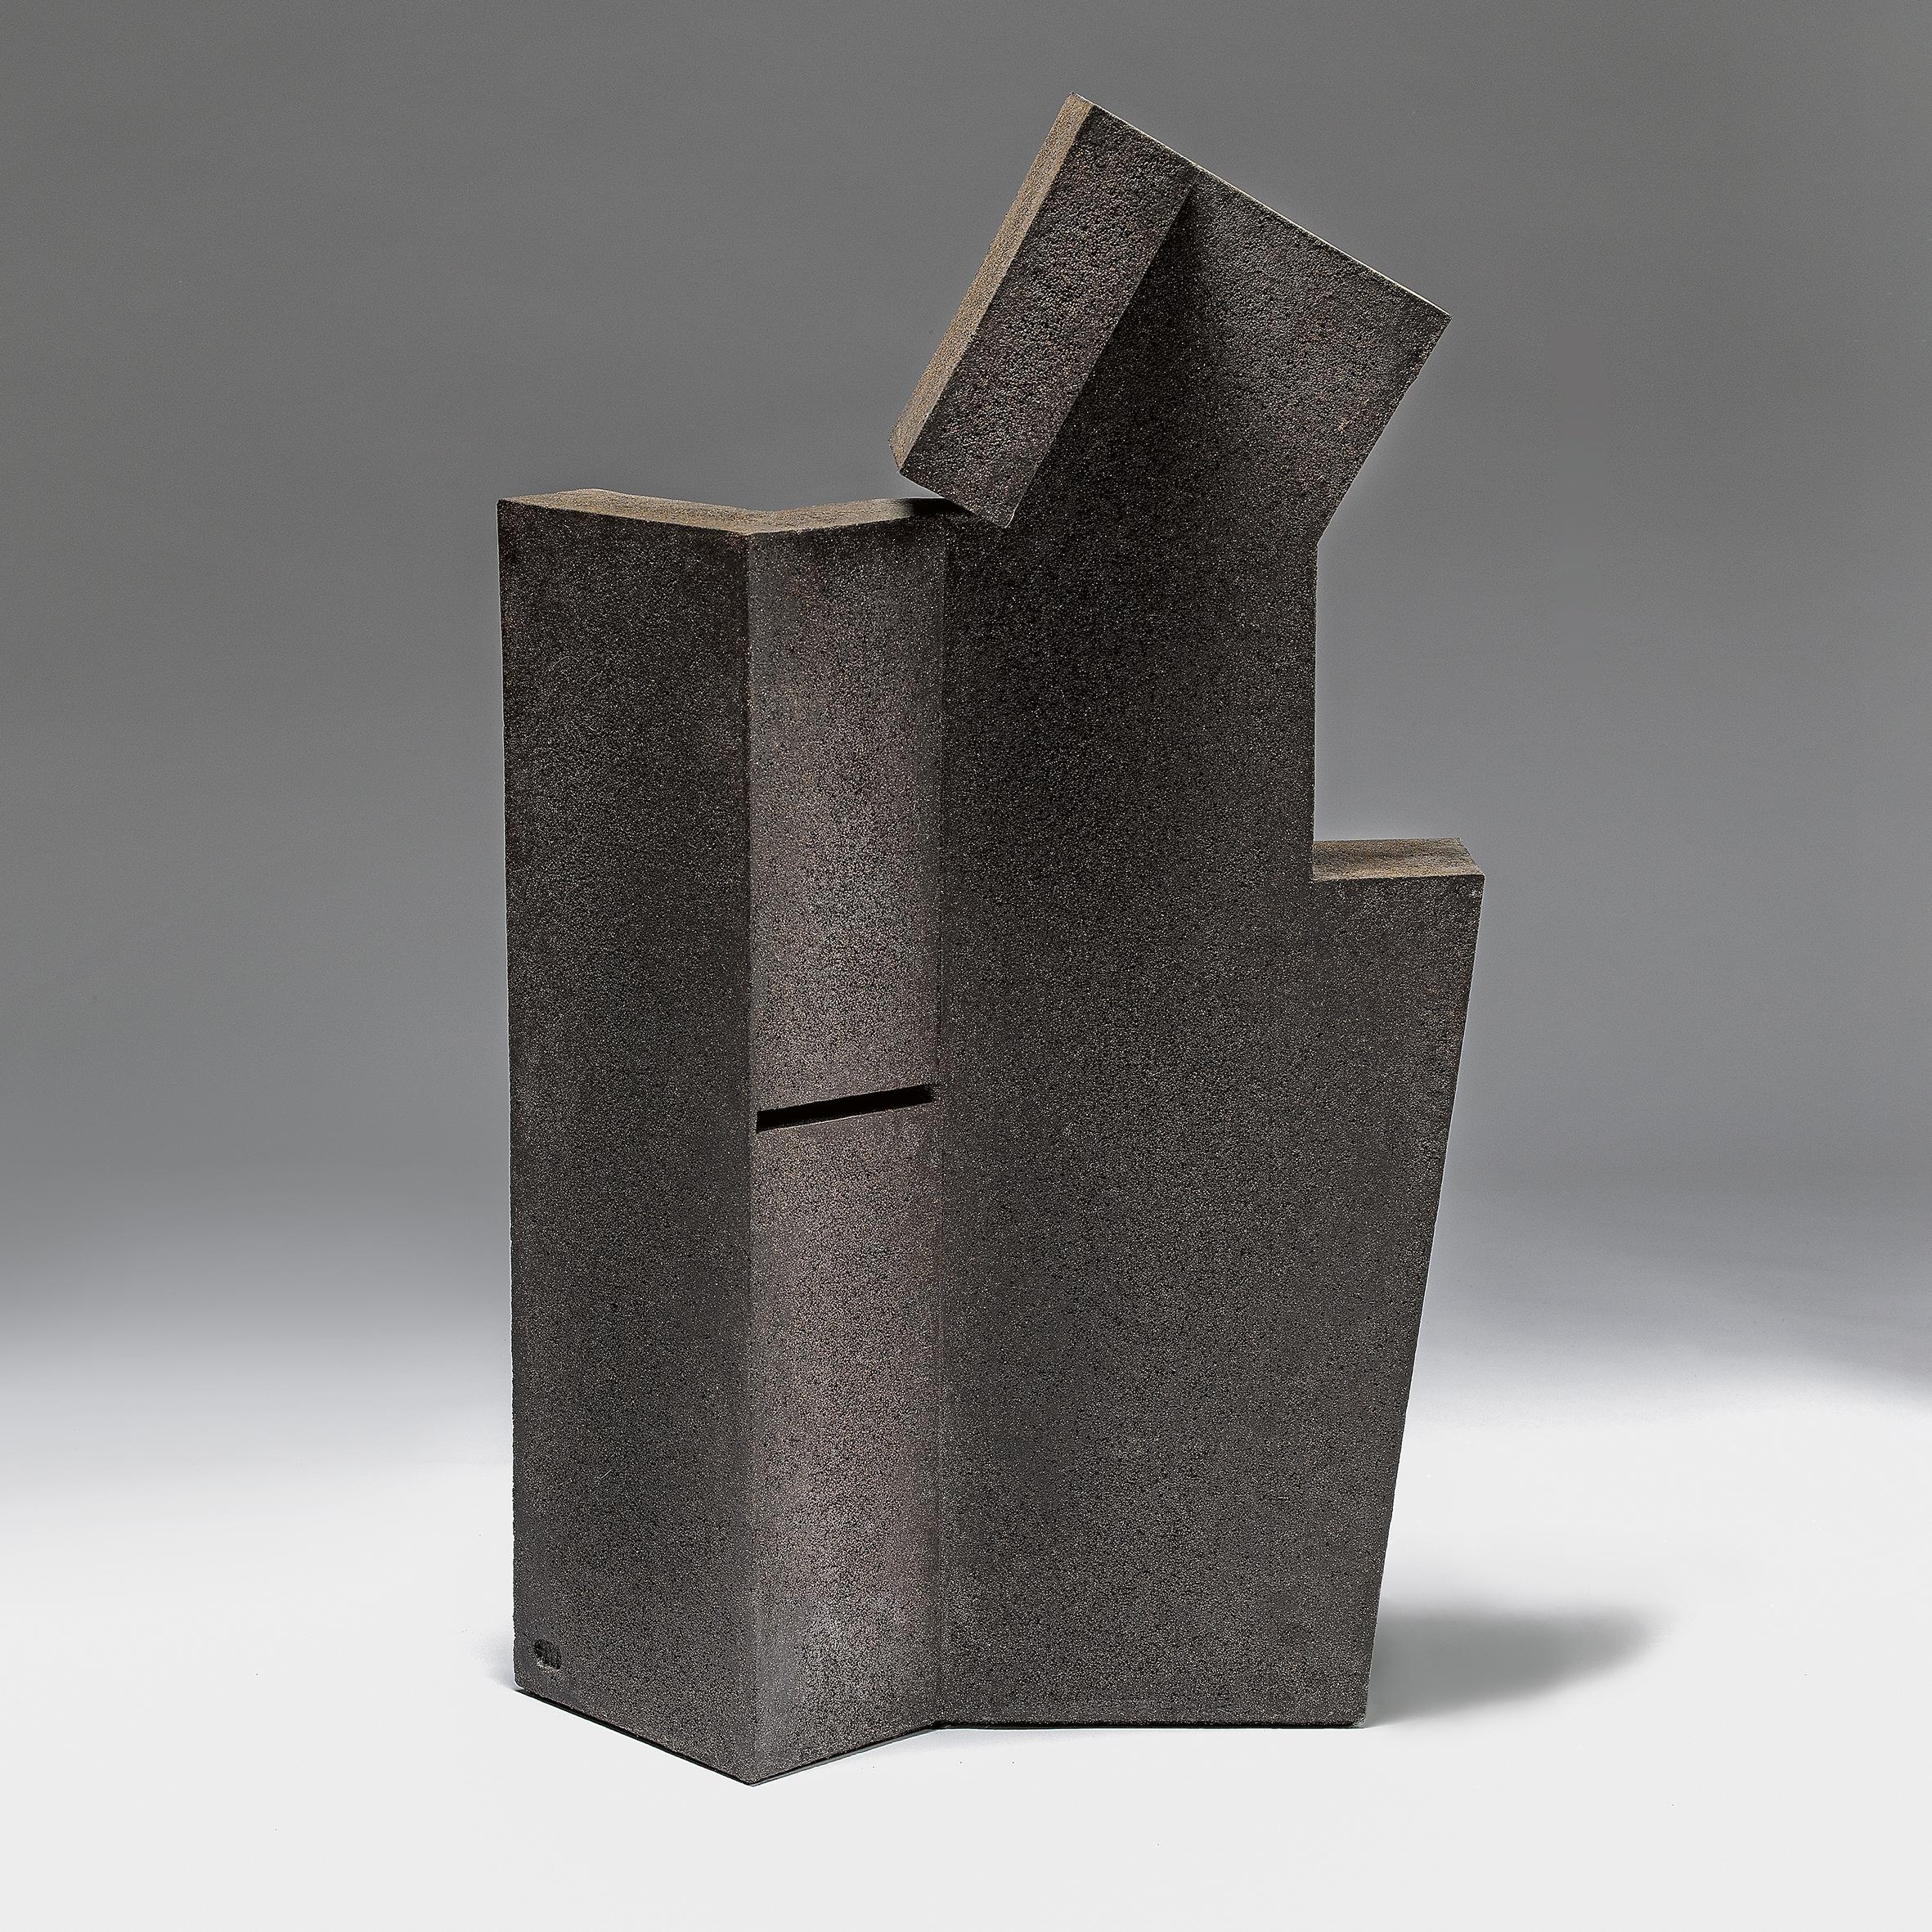 Museum quality artwork by Enric Mestre, born 1936 in Valencia Spain. Mestre is recognized worldwide, won many international awards and has participated in numerous individual and collective exhibitions around the world. His sculptural objects seem